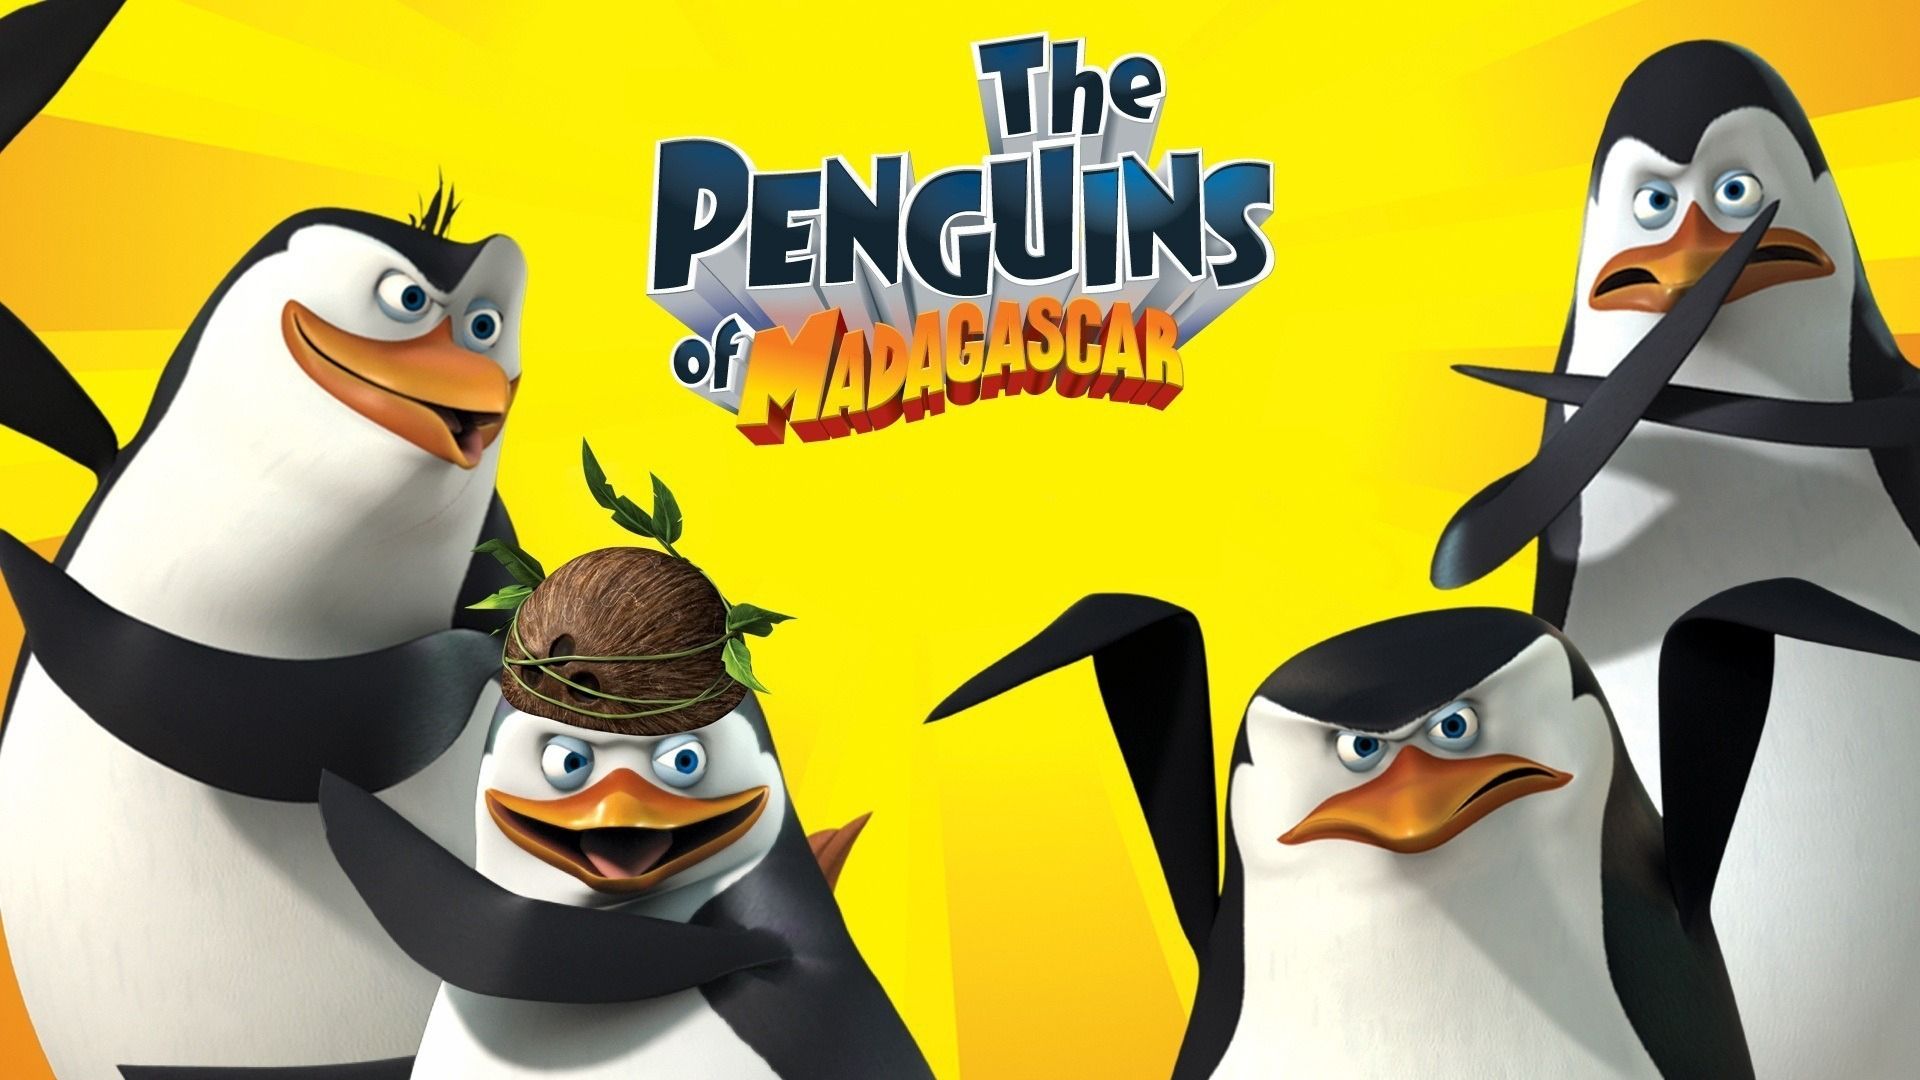 The Penguins of Madagascar Movie Wallpaper Image for Phone ...